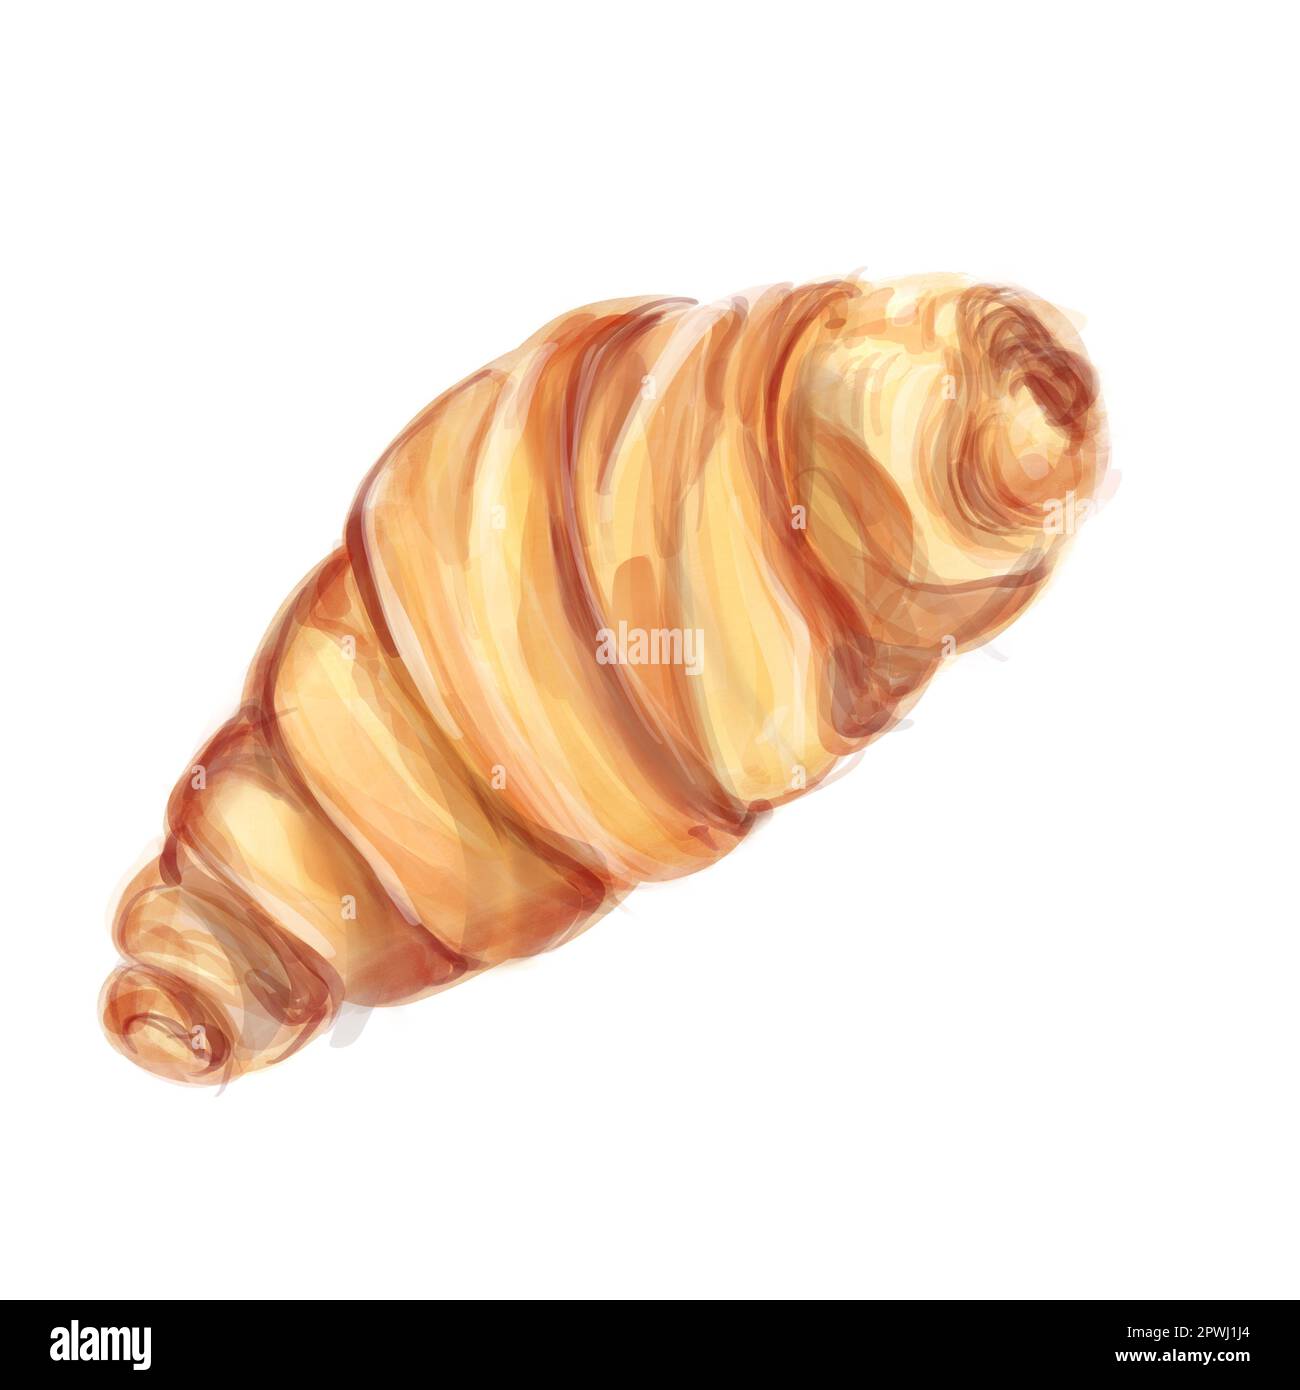 Watercolor hand drawn powdered croissant, isolated on white background. Food Illustration of traditional french breakfast for design. Stock Photo